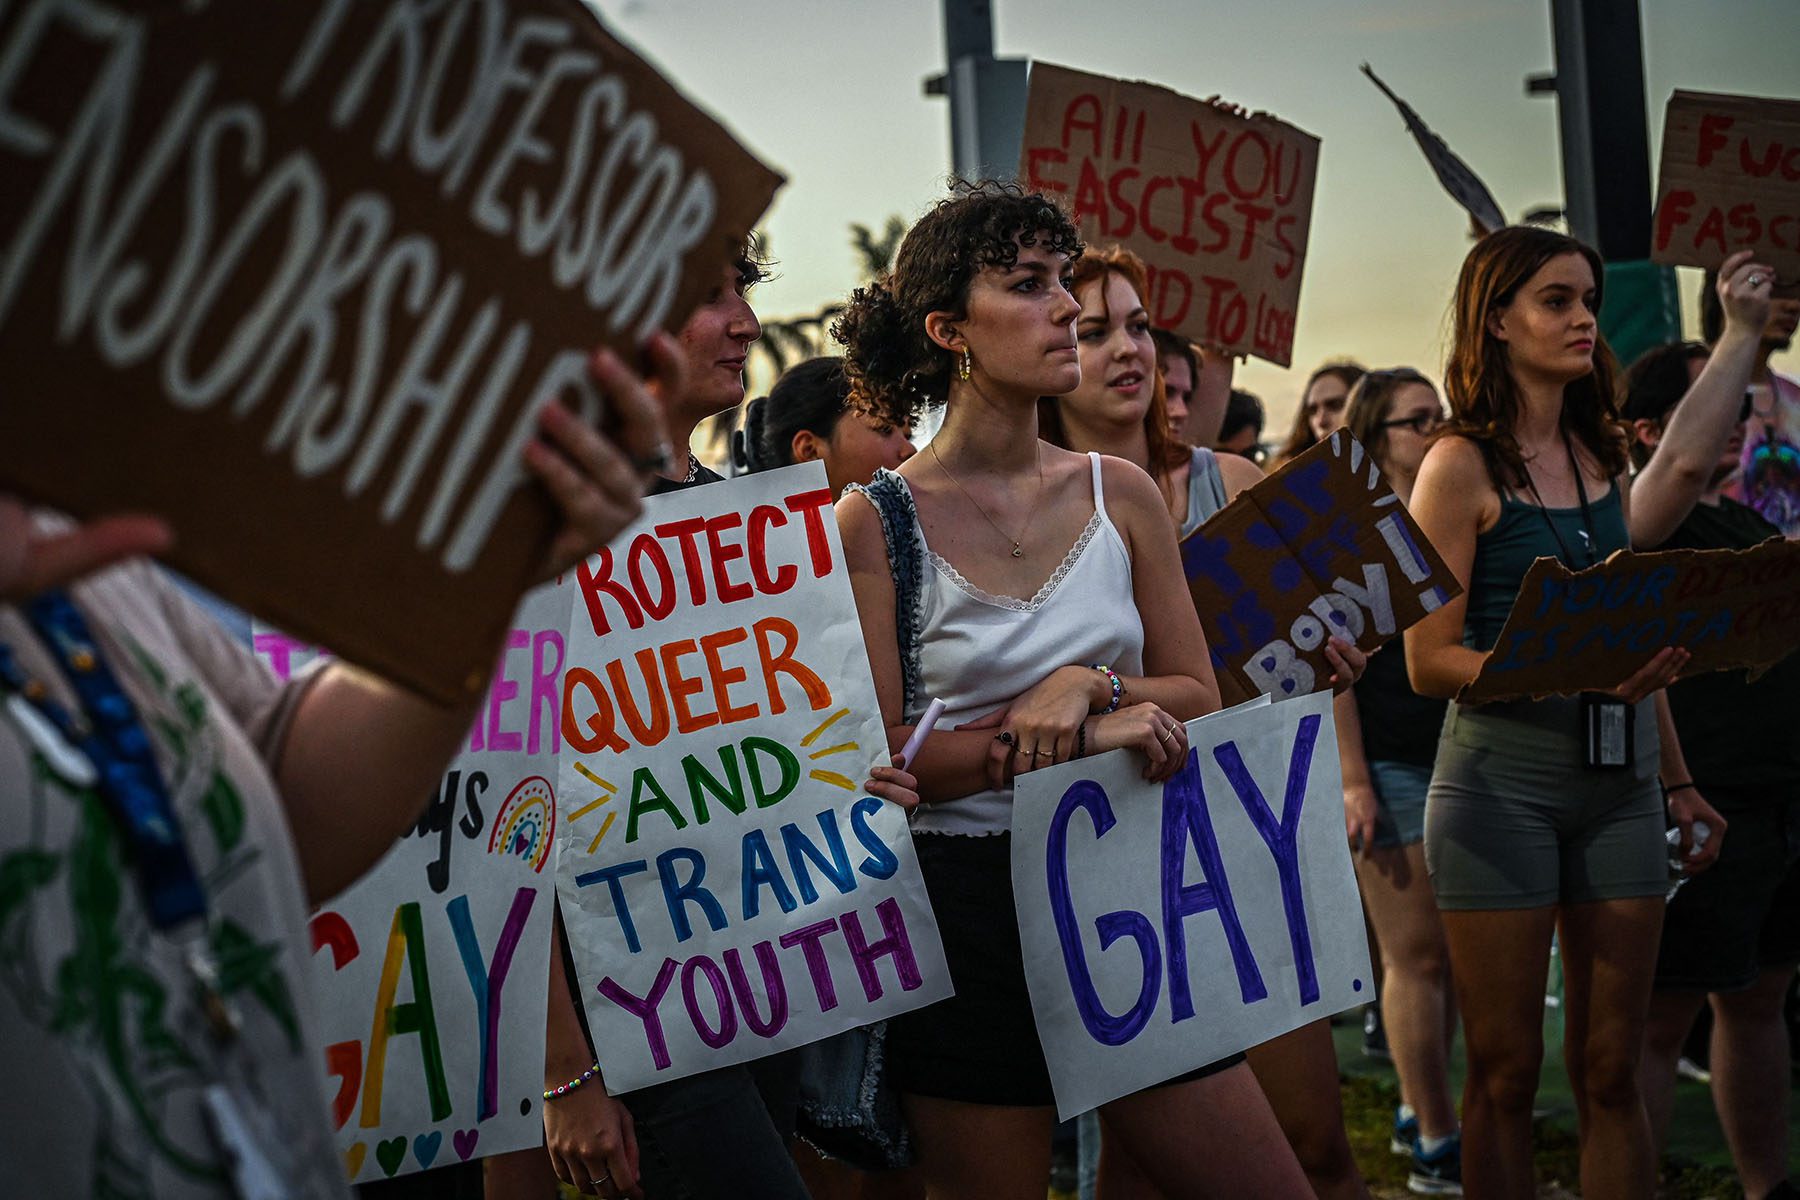 LGBTQ+ rights supporters protest against Florida Governor Ron DeSantis outside a "Don't Tread on Florida" campaign event.